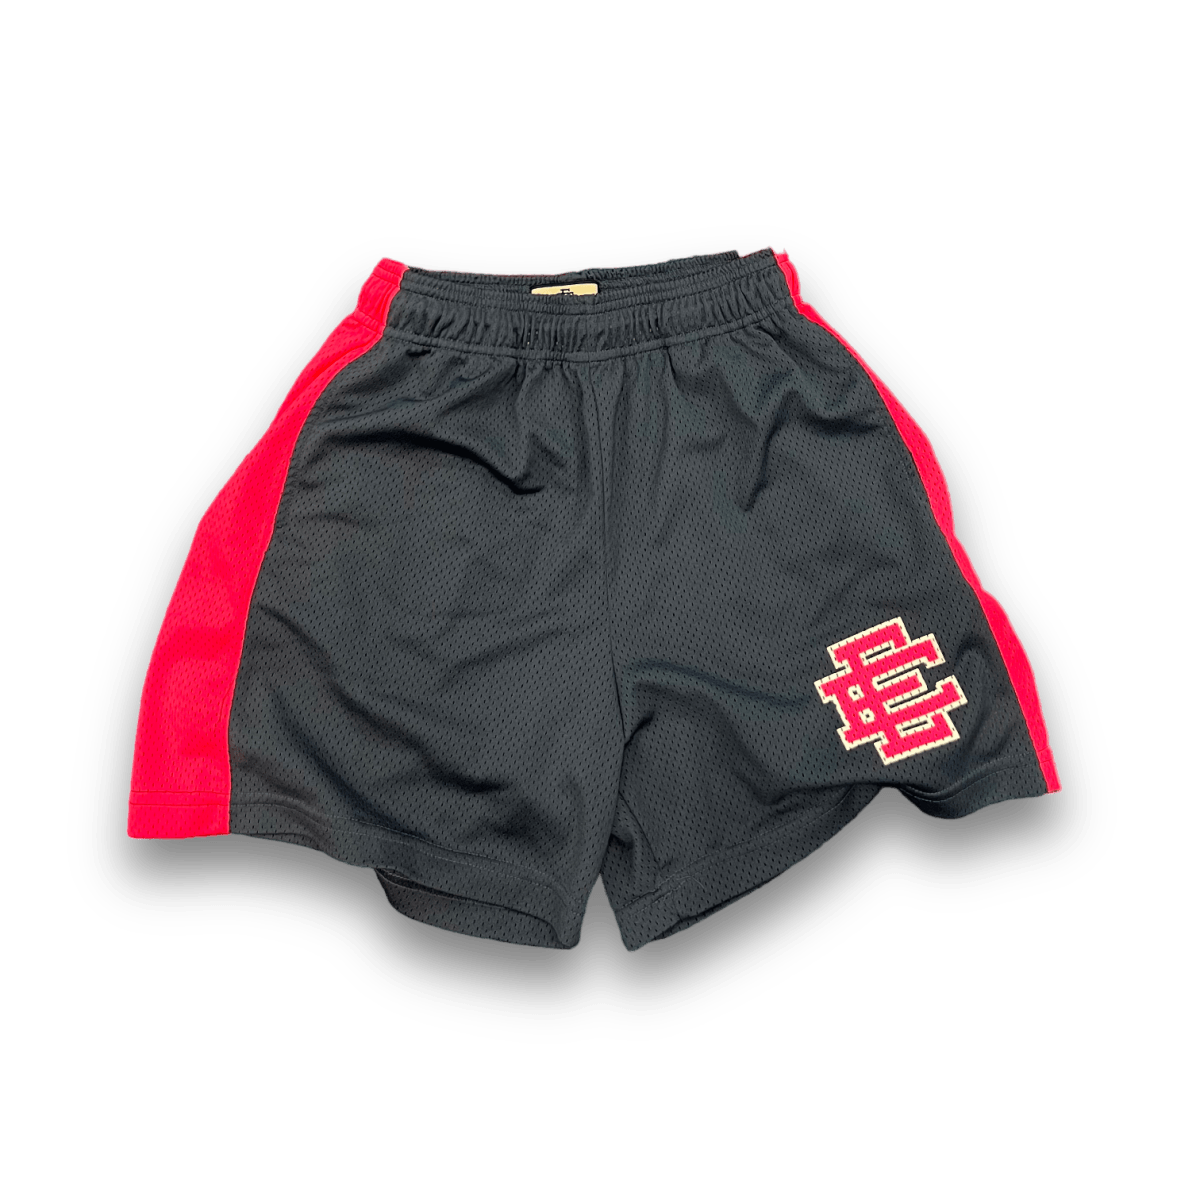 Eric Emanuel EE Shorts - Blue and Pink - sneaker - Shorts - Eric Emanuel - Jawns on Fire